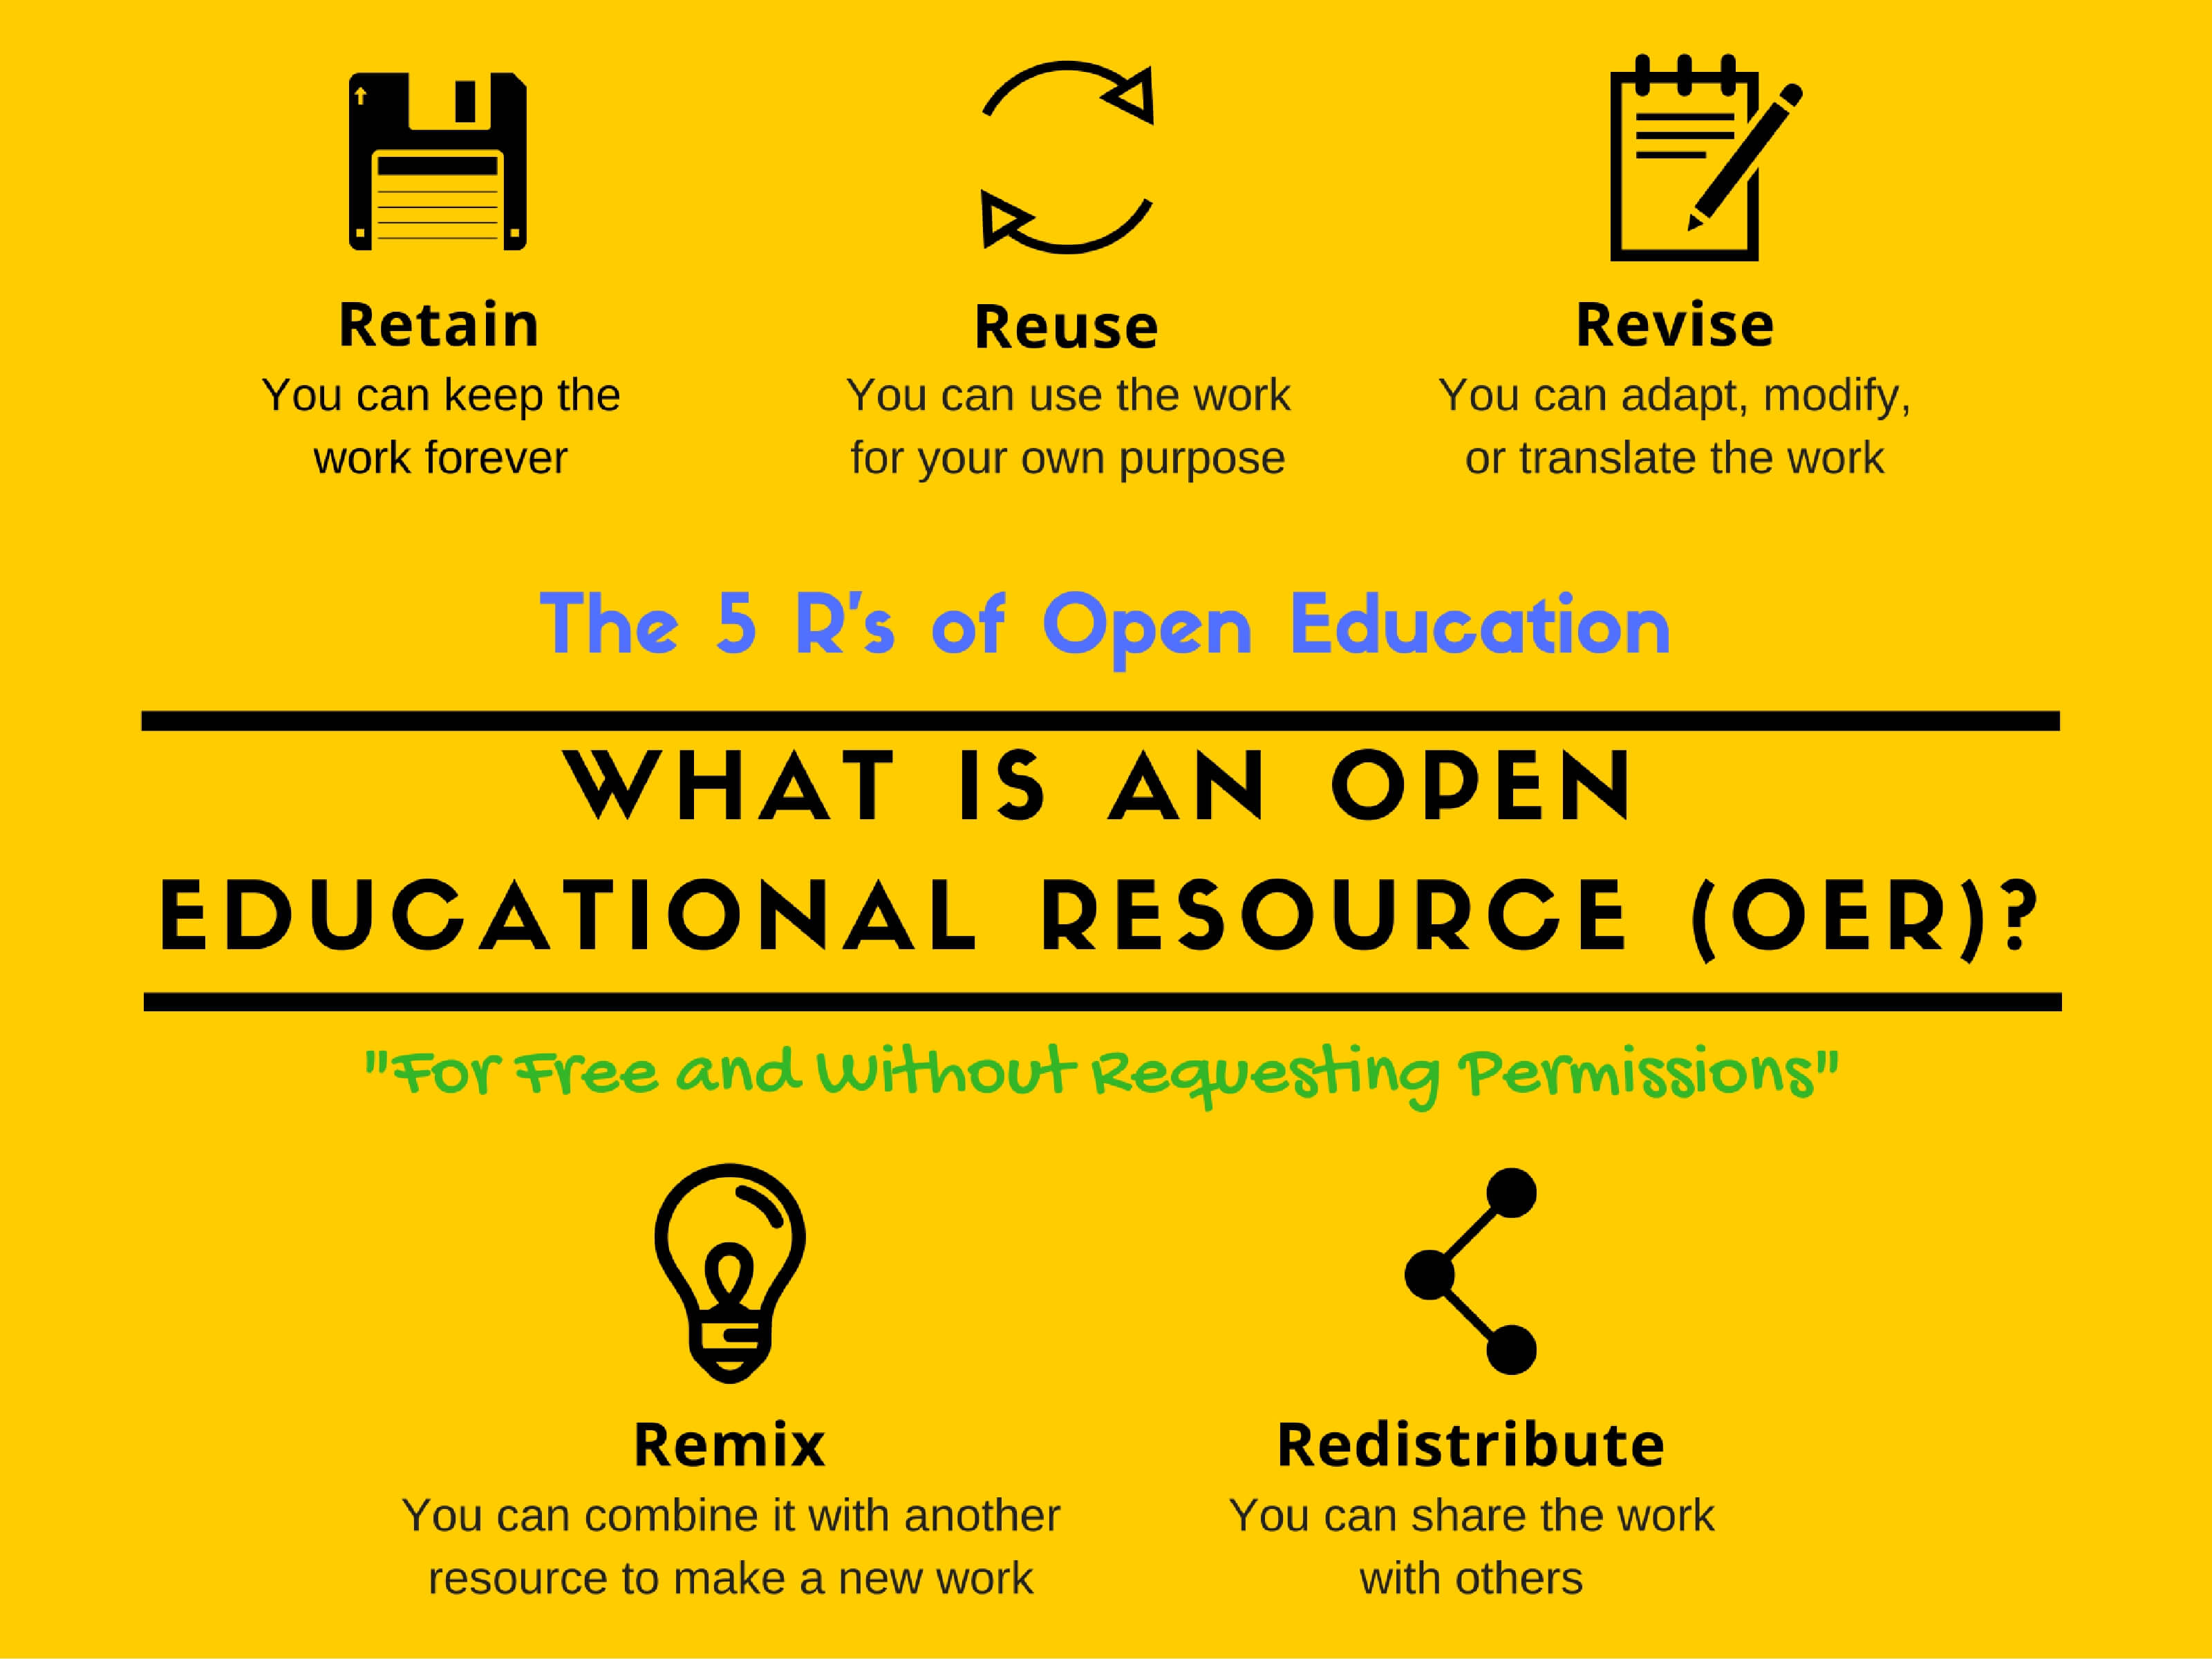 OER Infographic: Open Educational Resources can be used for free and without permission.